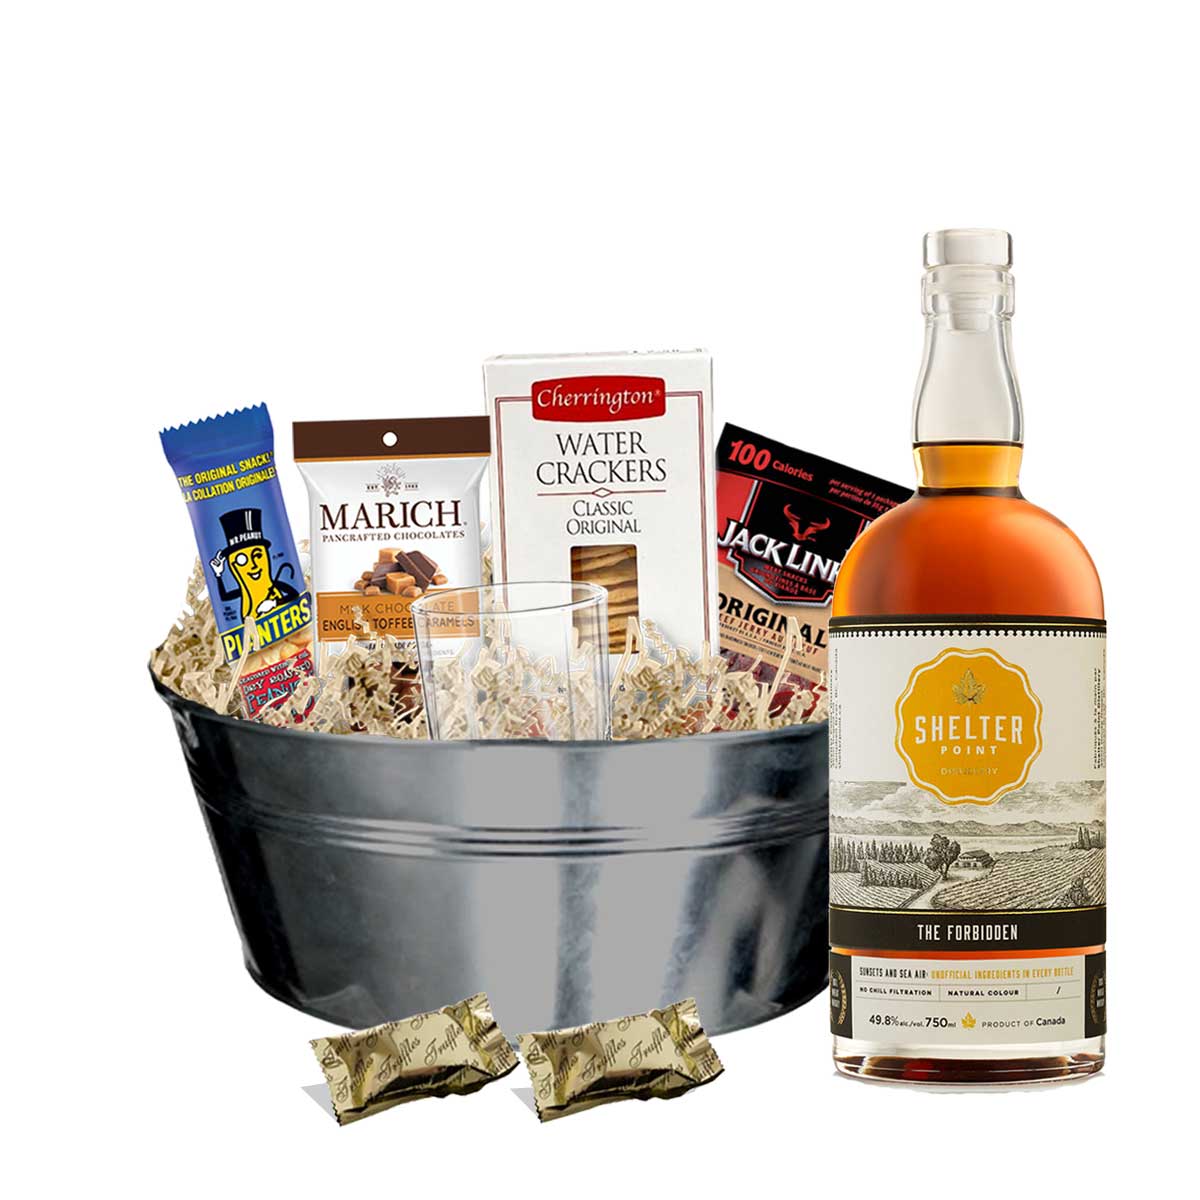 TAG Liquor Stores BC - Shelter Point The Forbidden Wheat Whisky 750ml Gift Basket